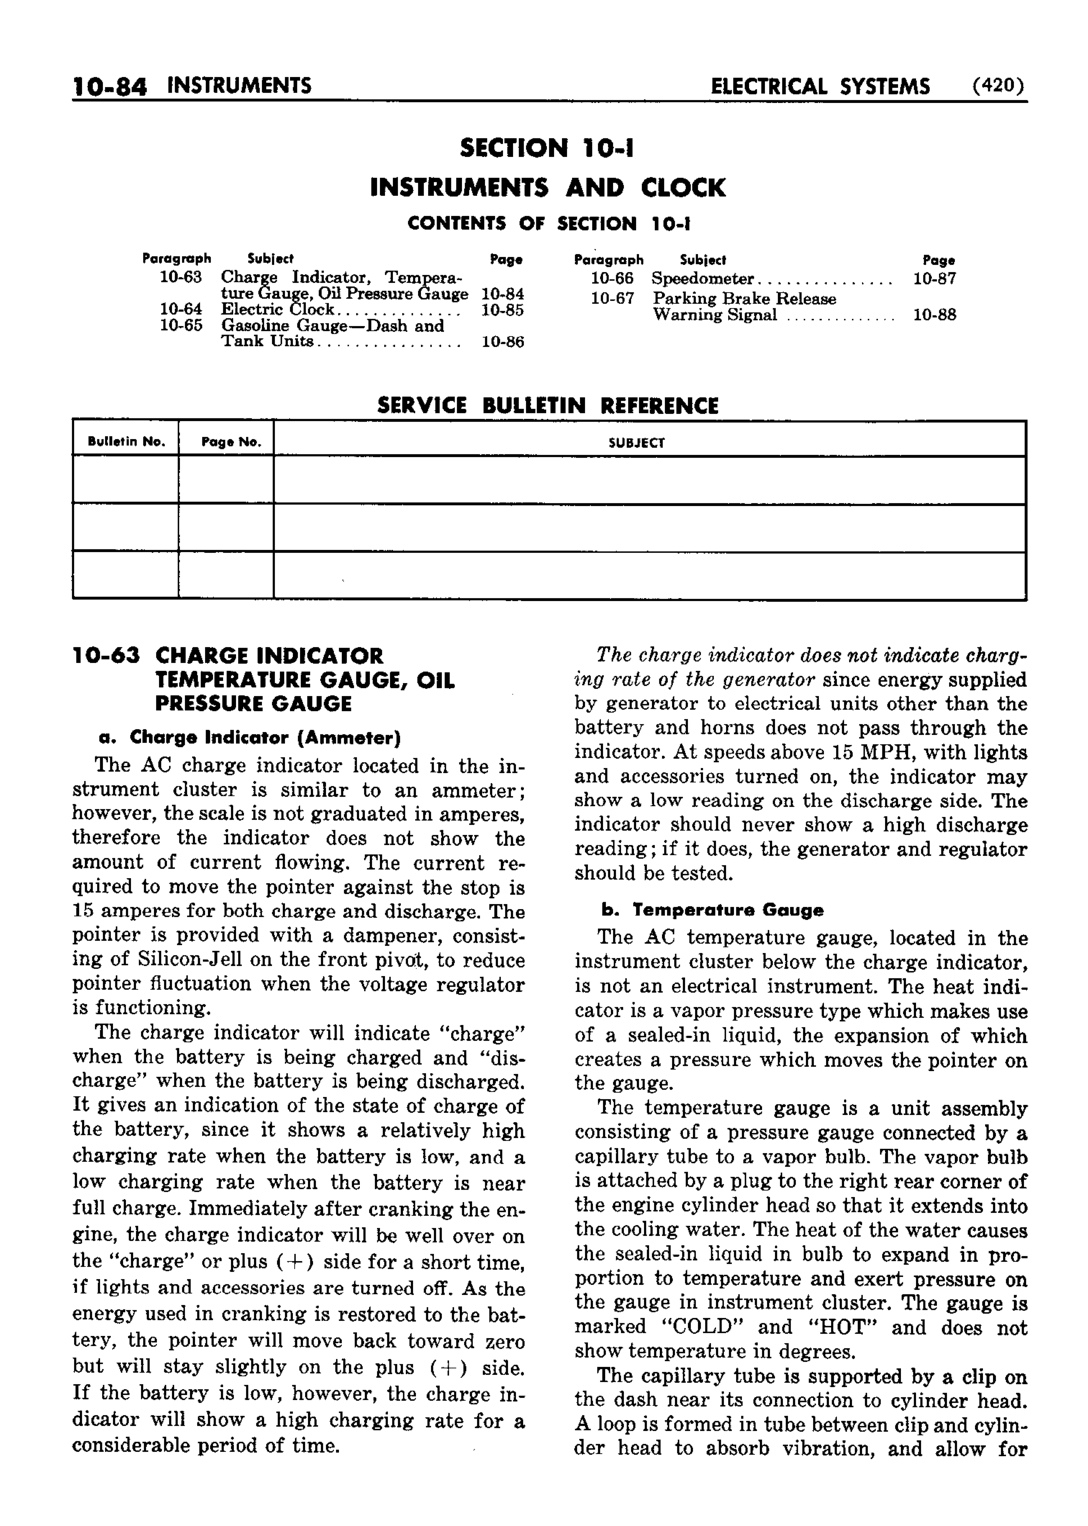 n_11 1952 Buick Shop Manual - Electrical Systems-084-084.jpg